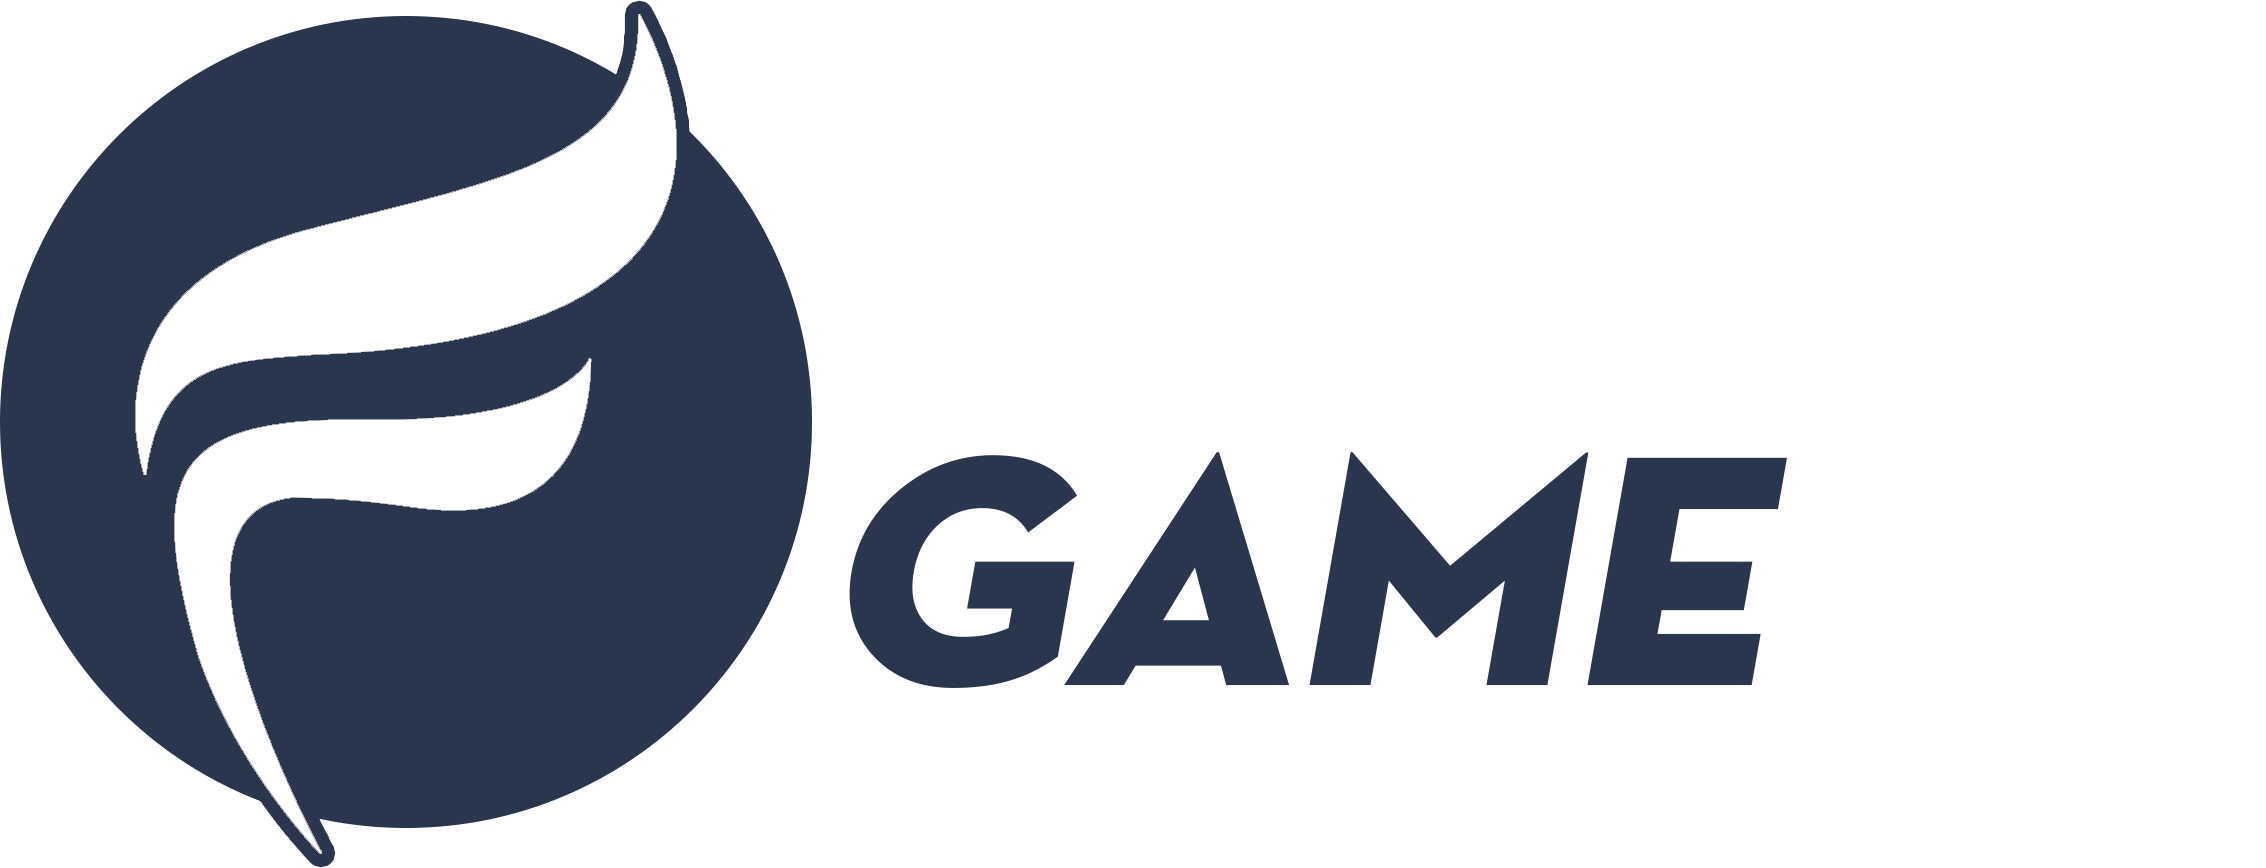 FrienzyGame - The Best Place to Play Free Games Online Now 